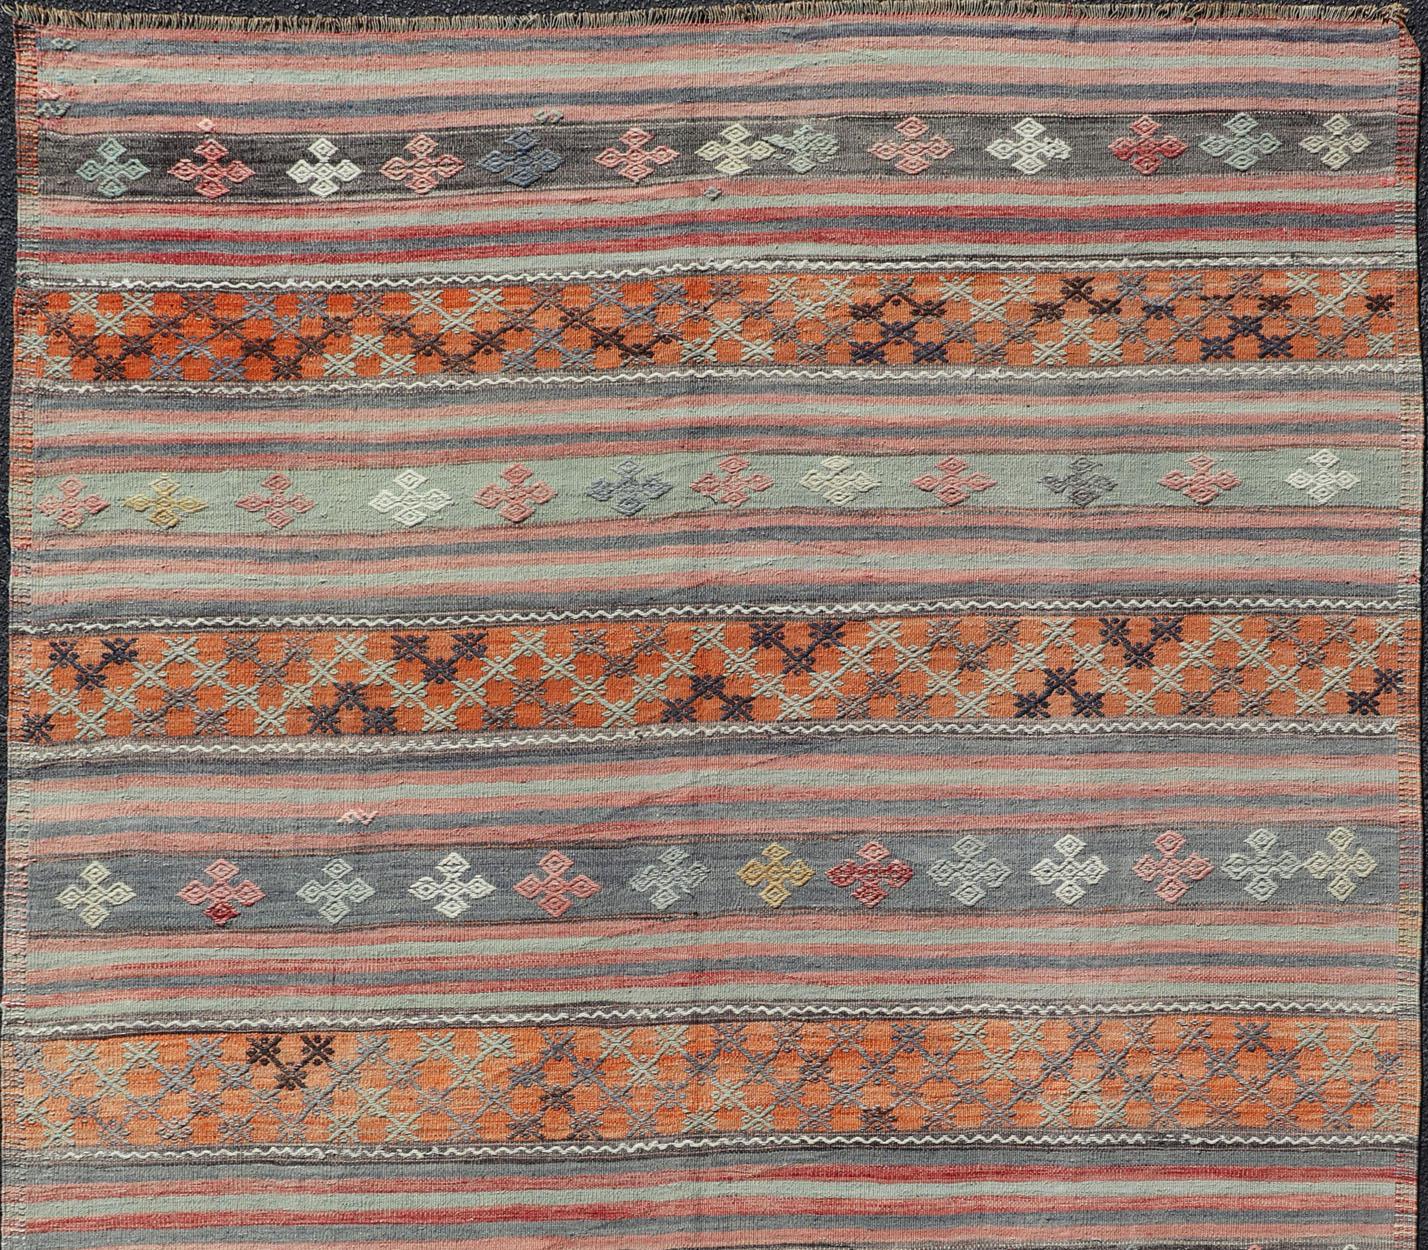 Turkish Kilim vintage rug with assorted stripe design in a variety of colors, rug TU-NED-1033, country of origin / type: Turkey / Kilim, circa mid-20th century

Featuring a repeating horizontal stripe design, with an assortment of geometric motifs